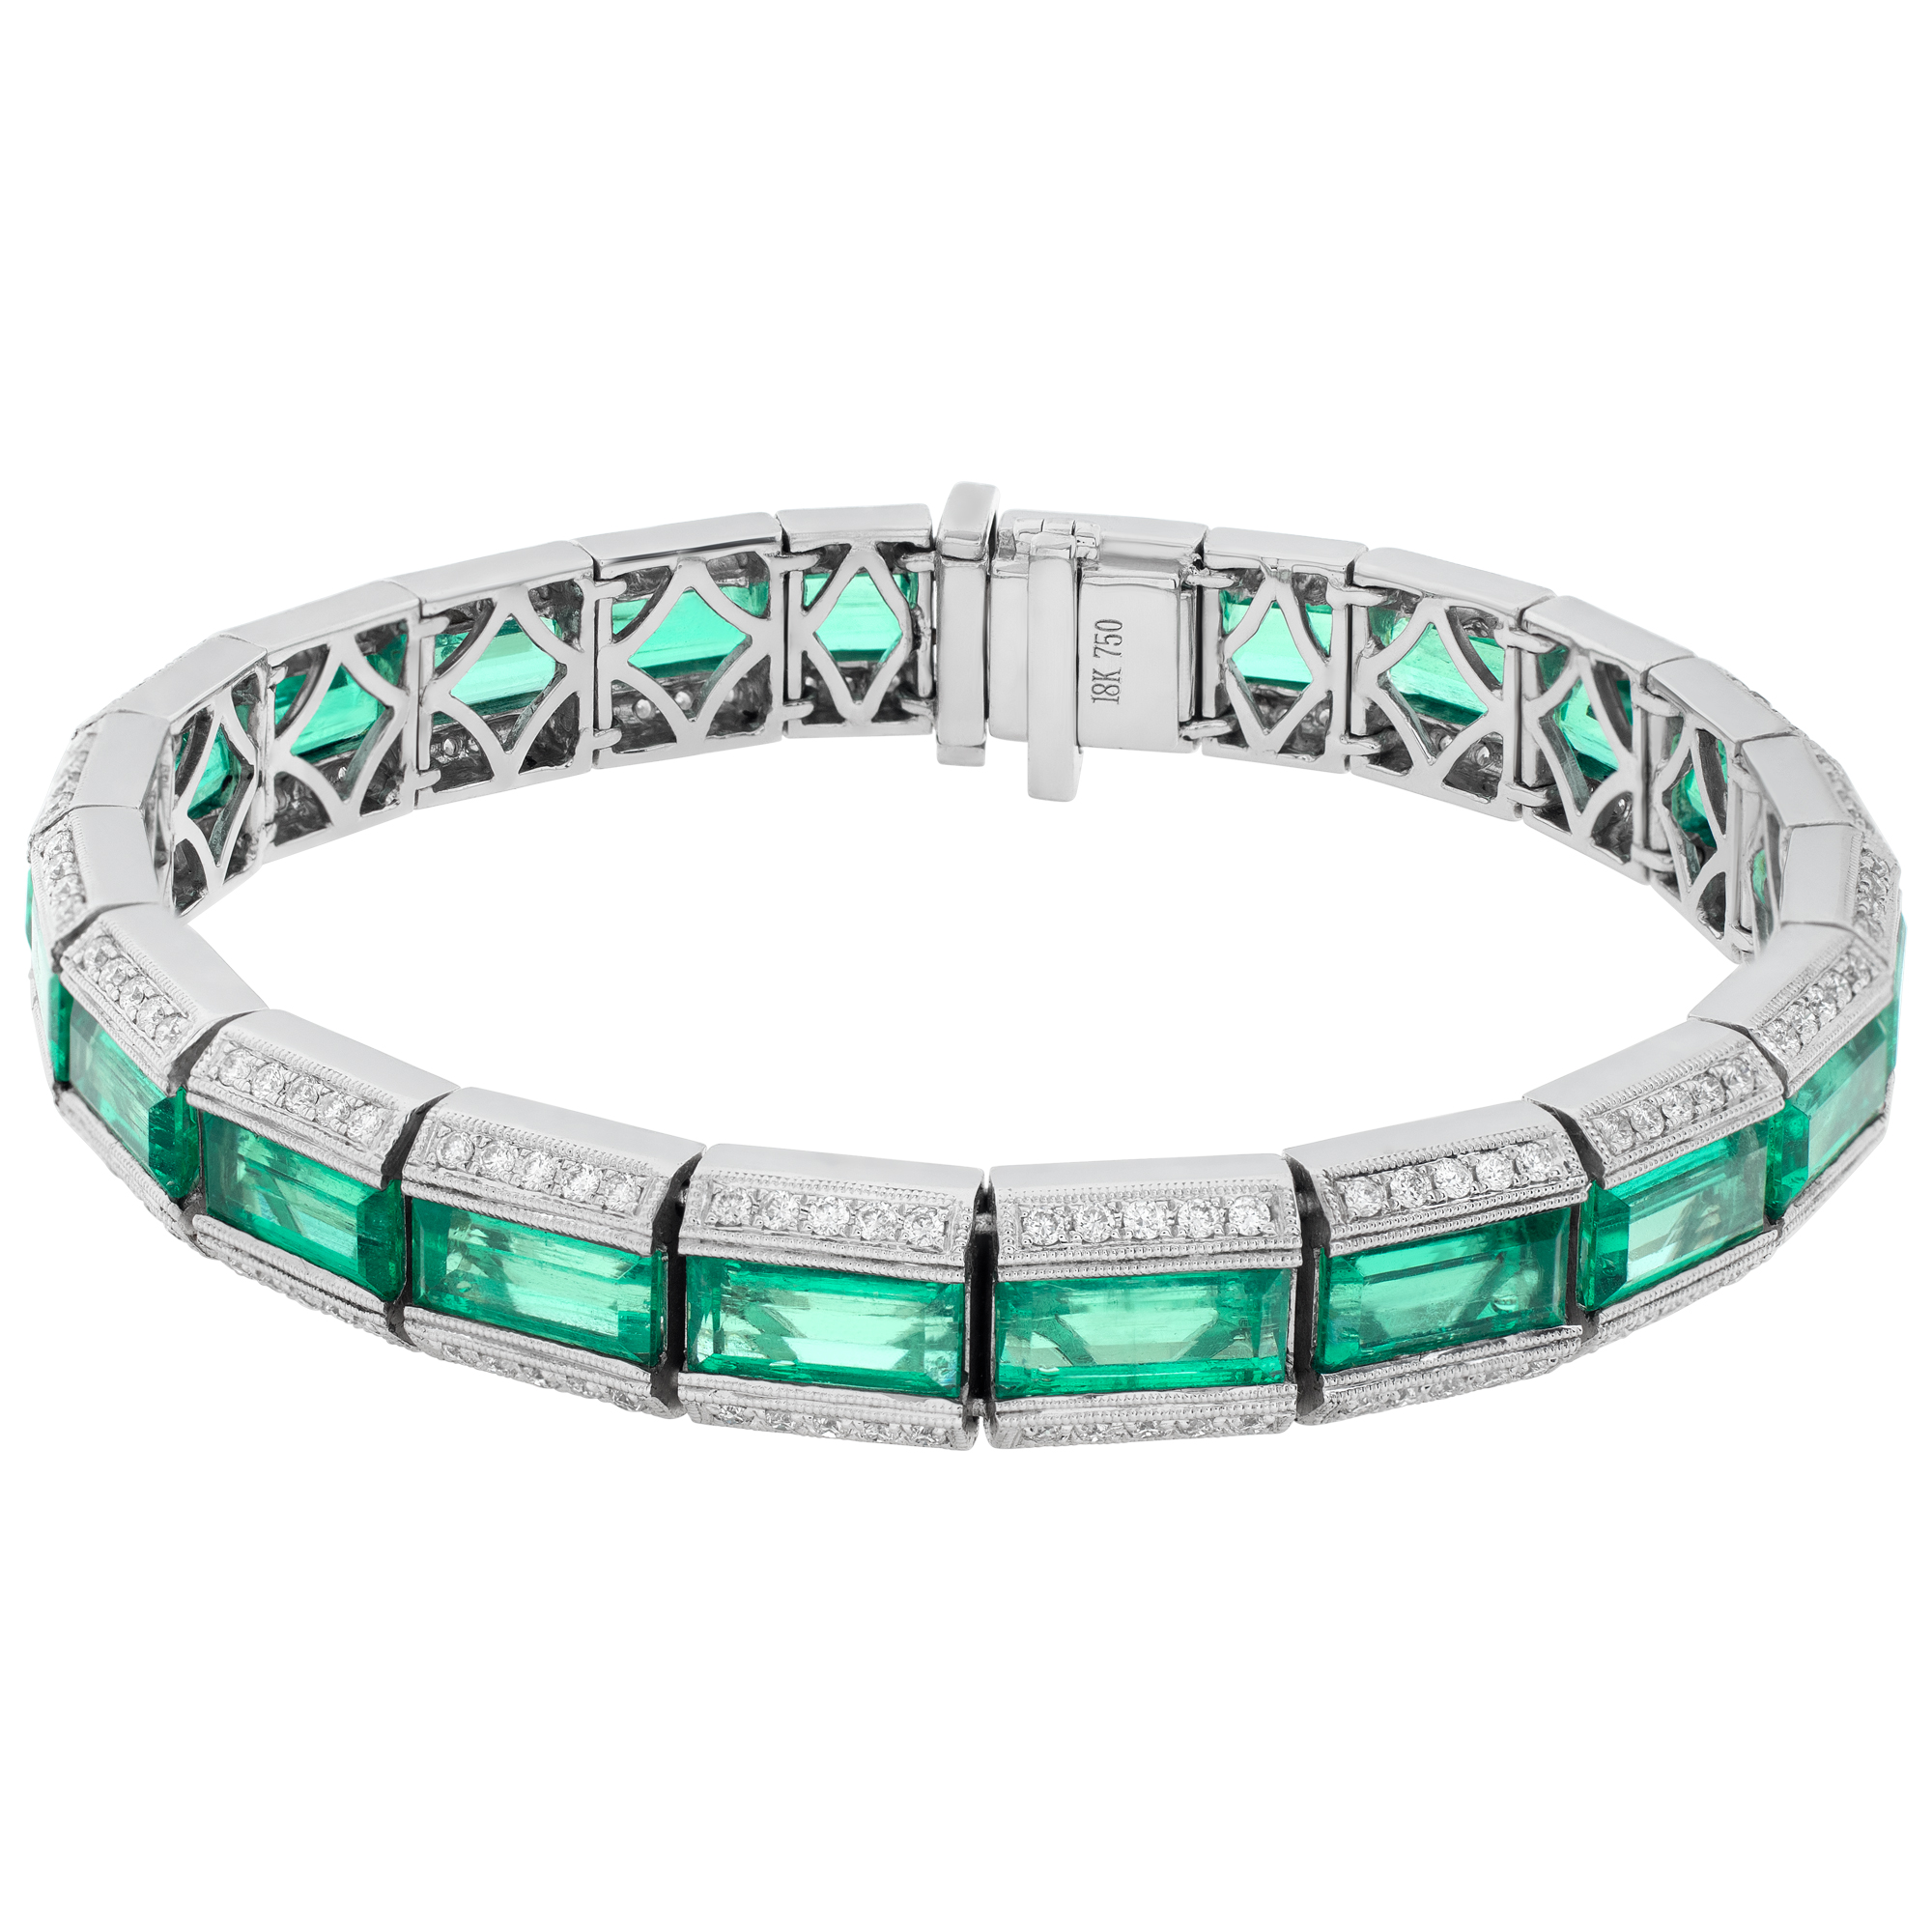 Colombian emerald cut emerald and diamond line bracelet set in 18K white gold. image 1